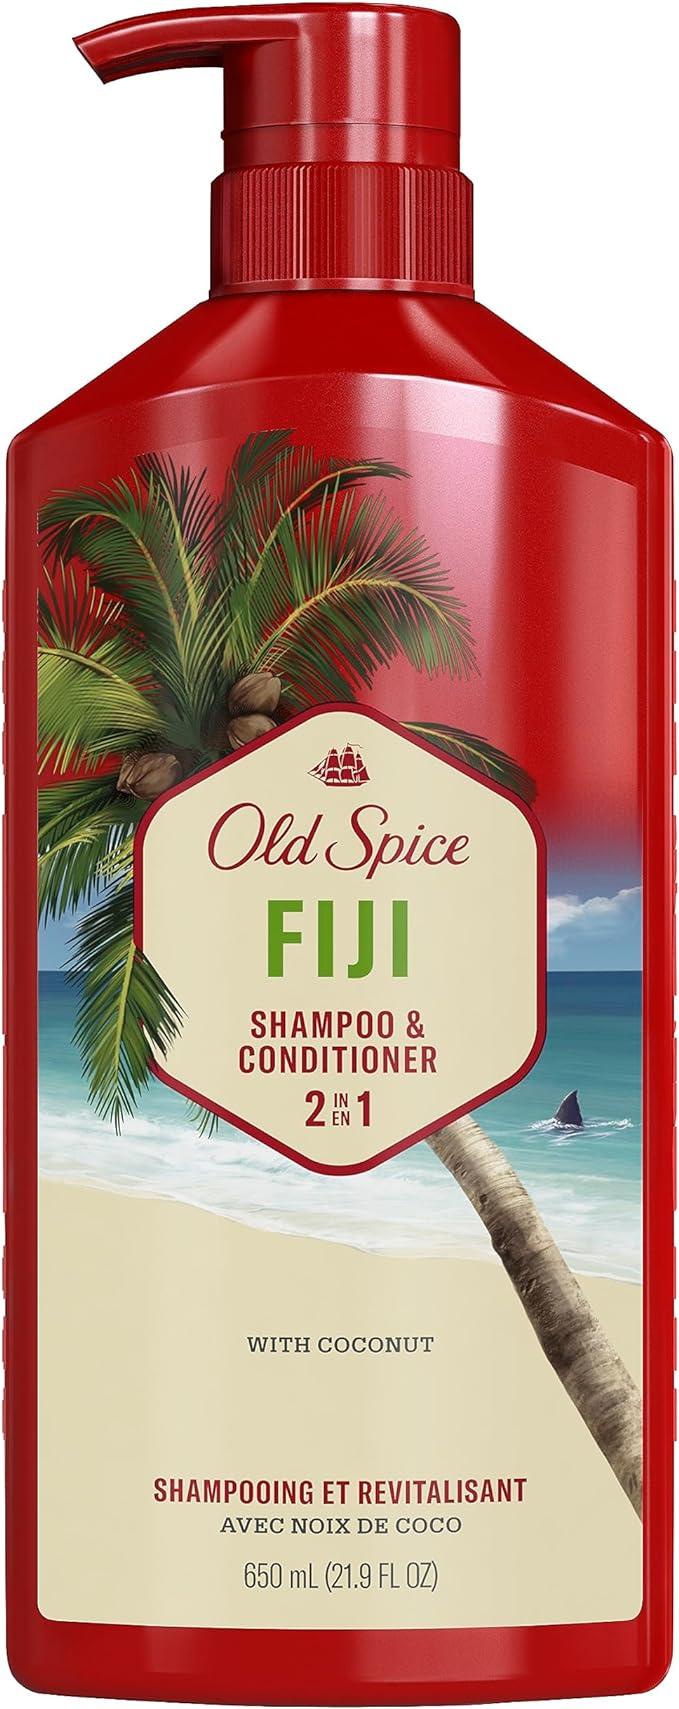 old spice fiji 2in1 shampoo and conditioner for men 650 milliliters  old spice b08nr4cwhm